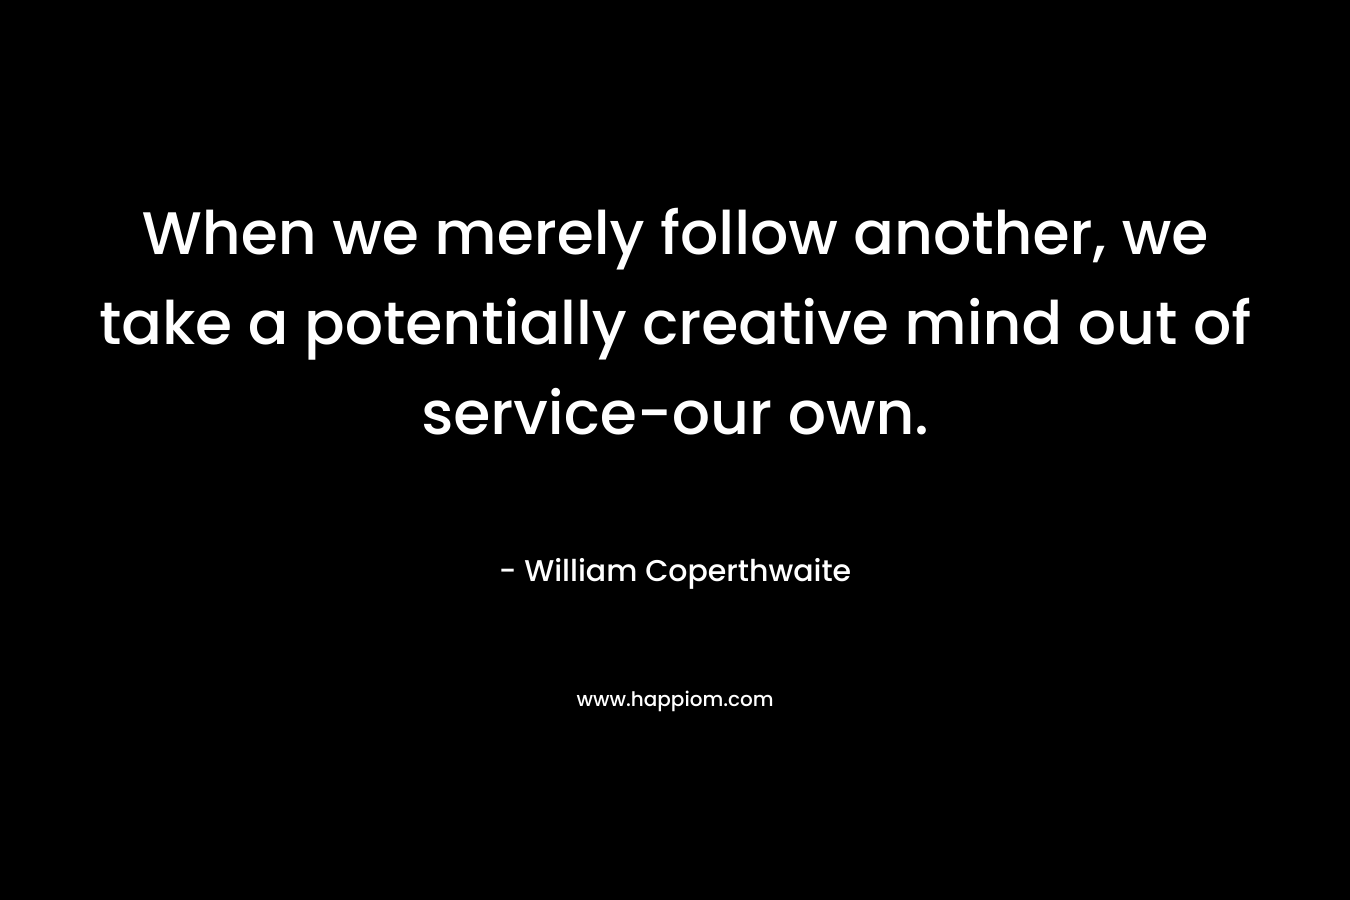 When we merely follow another, we take a potentially creative mind out of service-our own.  – William Coperthwaite